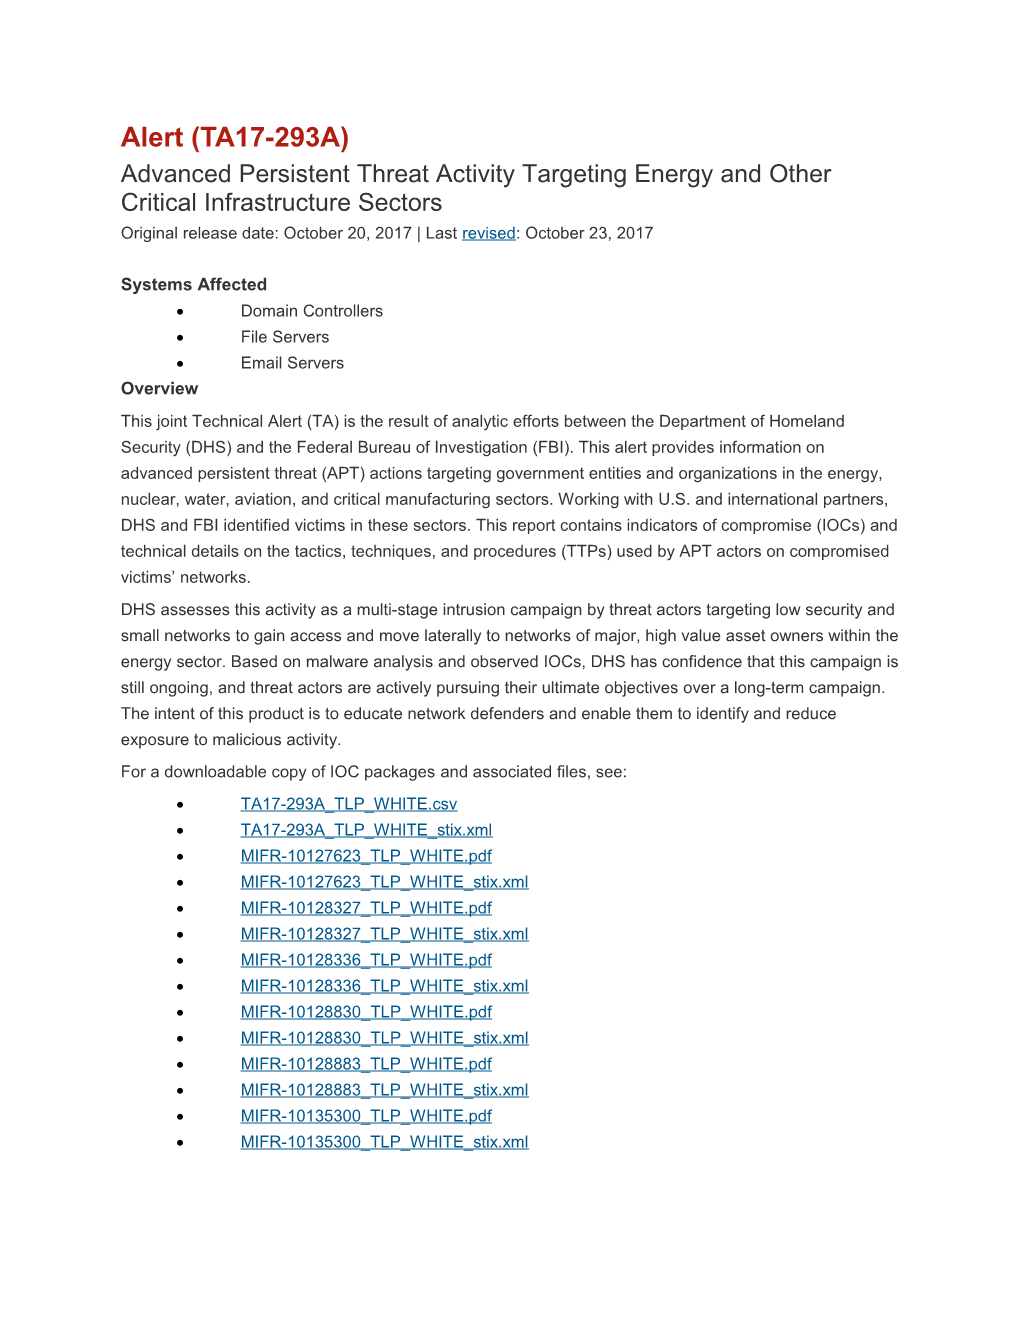 Advanced Persistent Threat Activity Targeting Energy and Other Critical Infrastructure Sectors